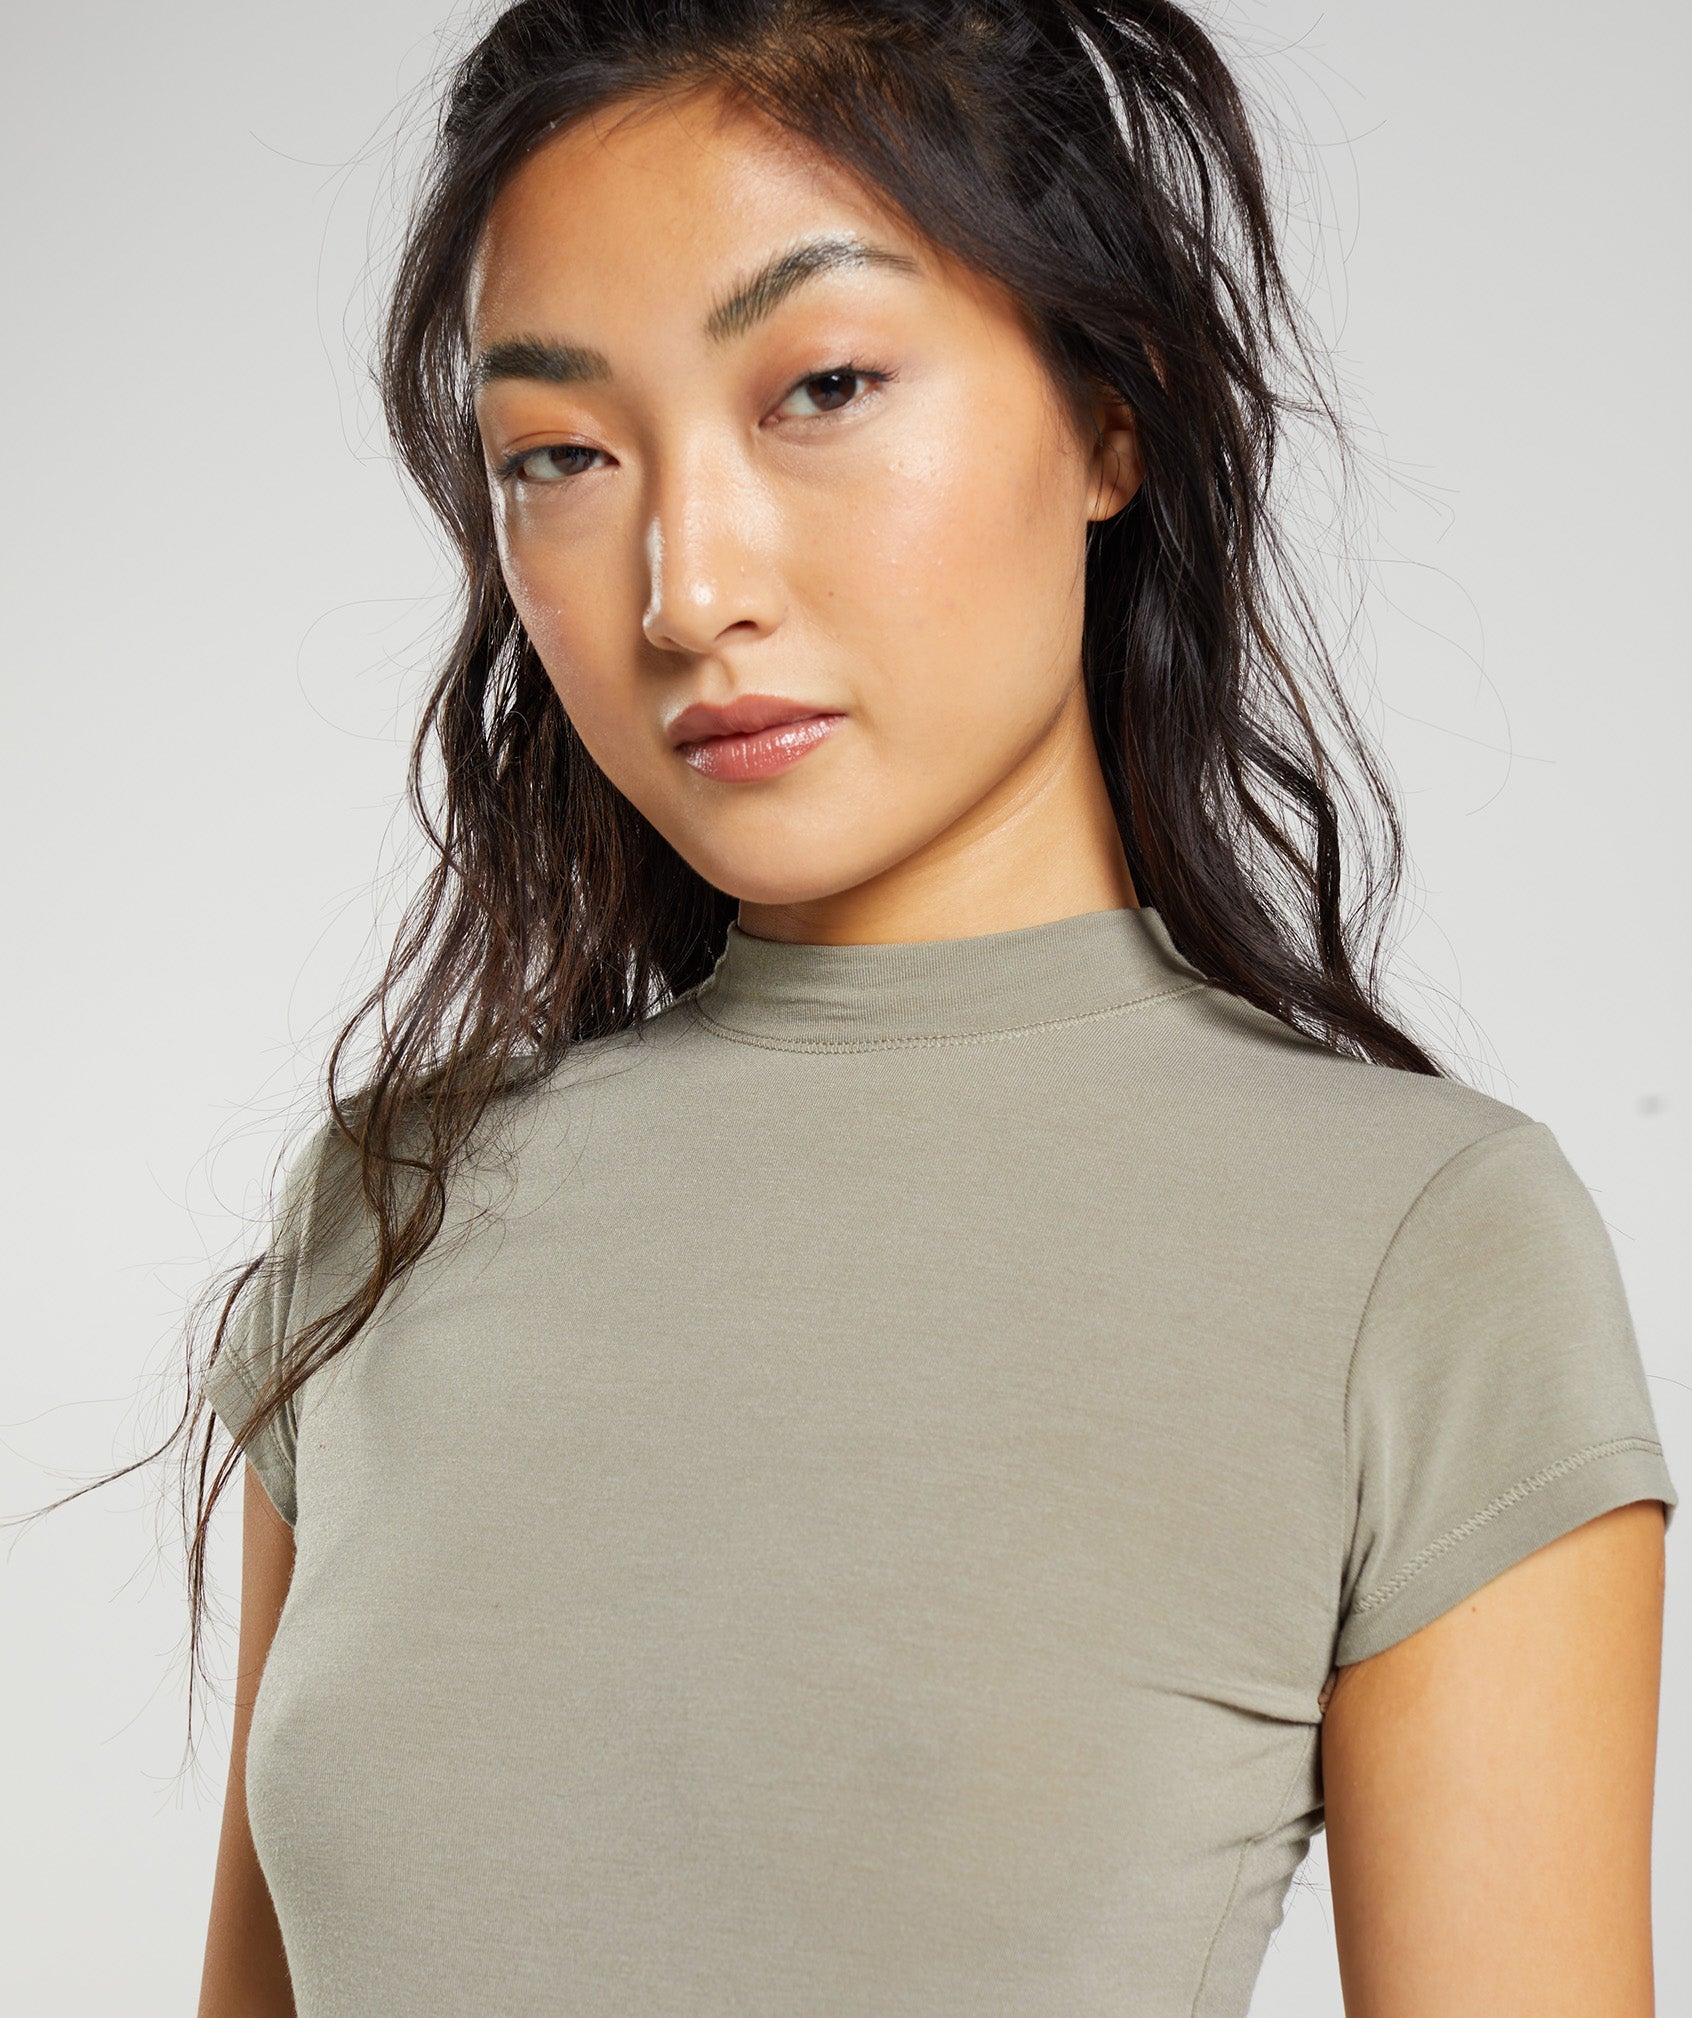 Jersey Body Fit T-Shirt in Earthy Brown